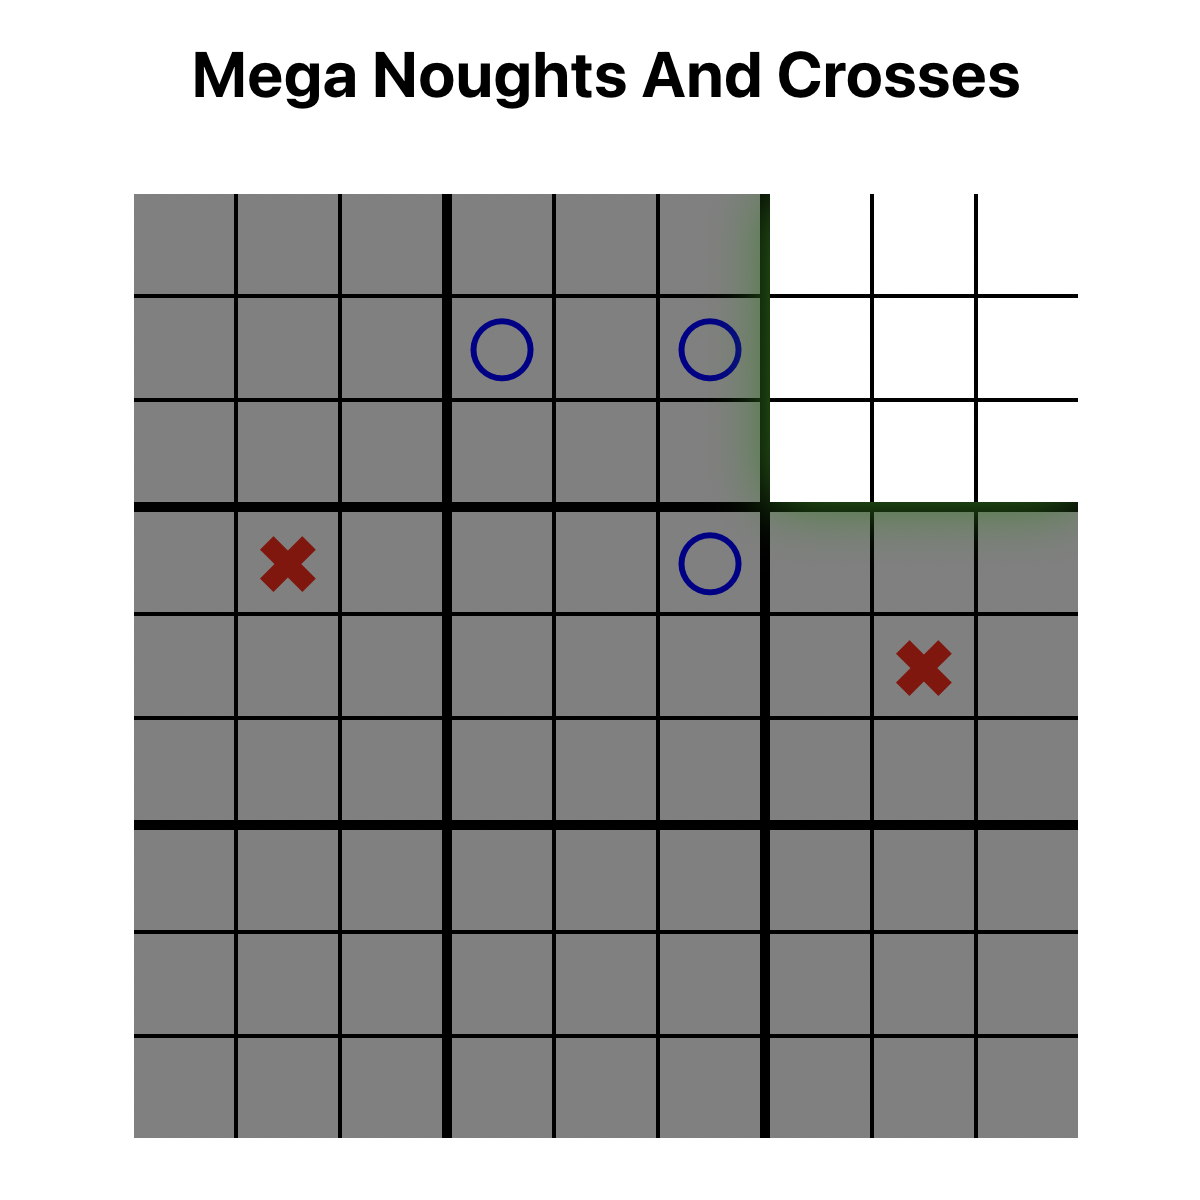 In the middle of a game of Mega Noughts and Crosses. O has just played a move in the middle subgrid.